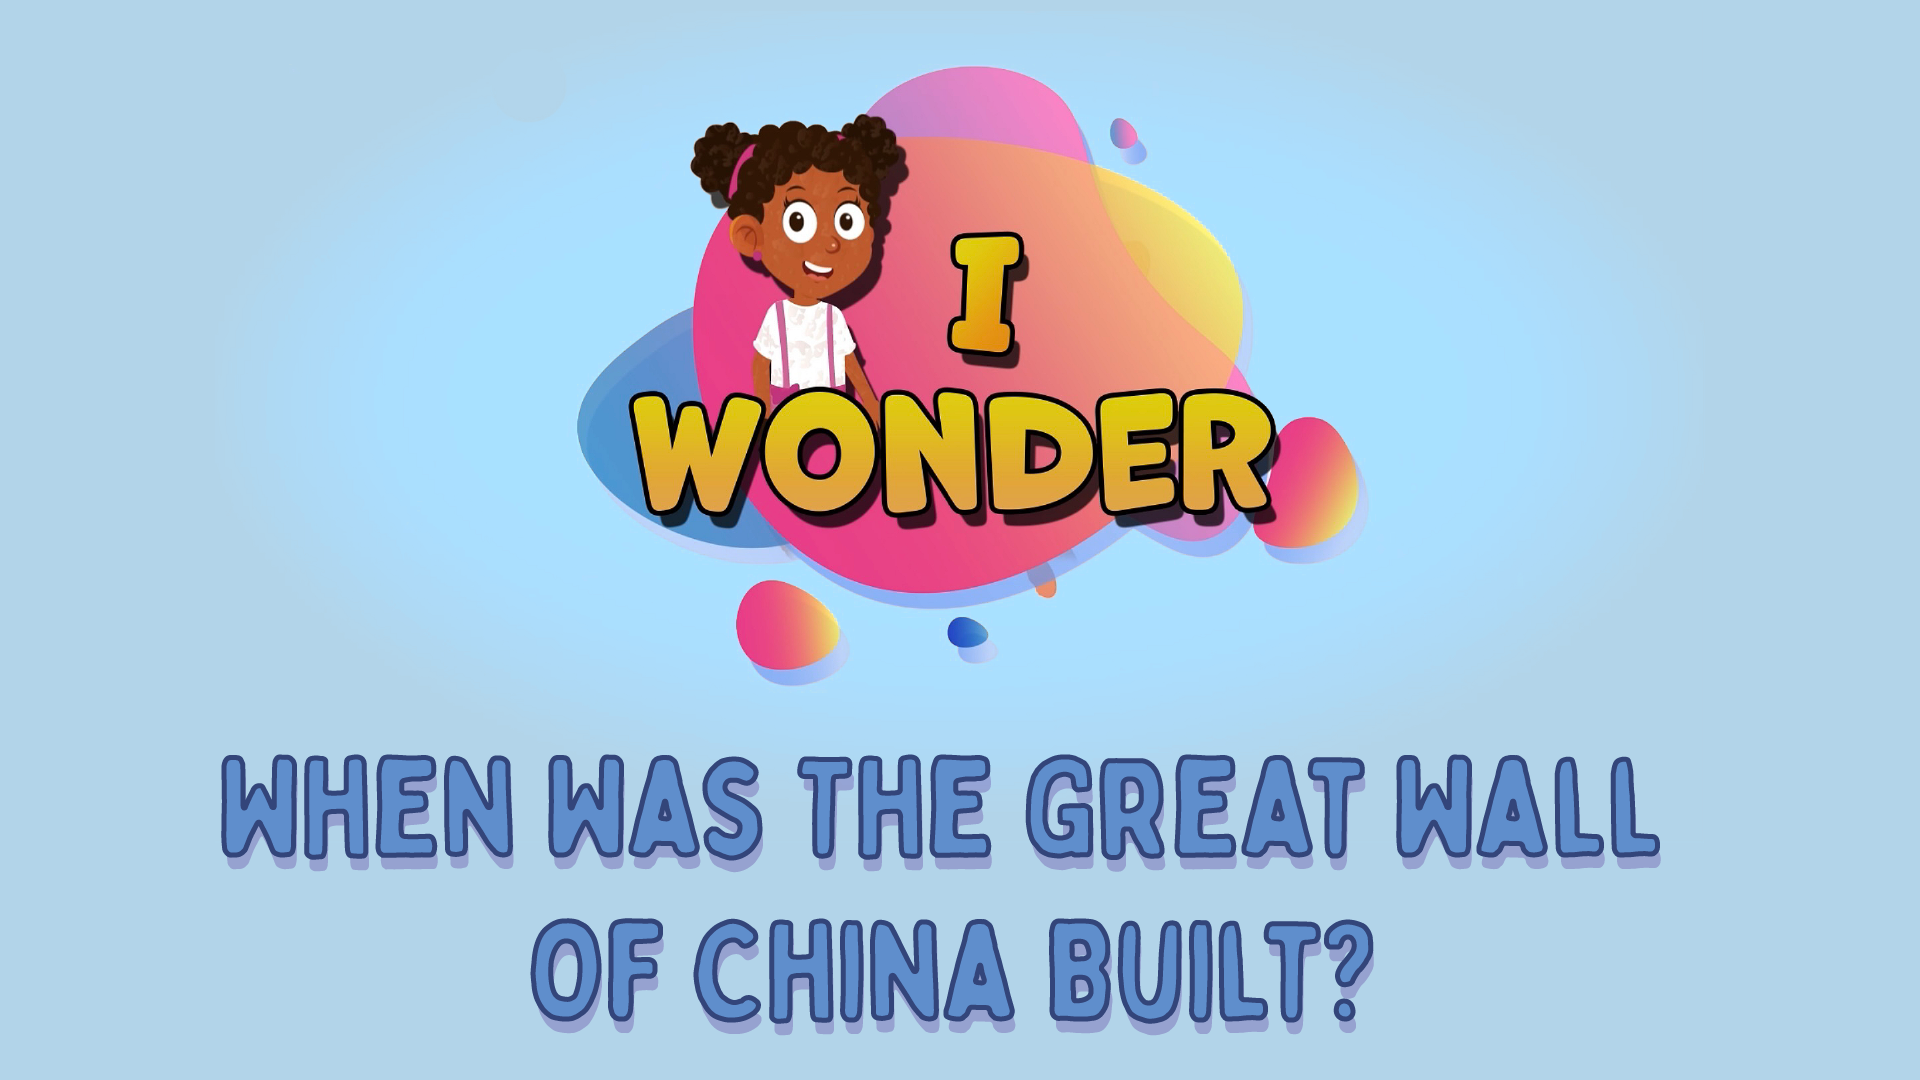 When Was The Great Wall Of China Built?